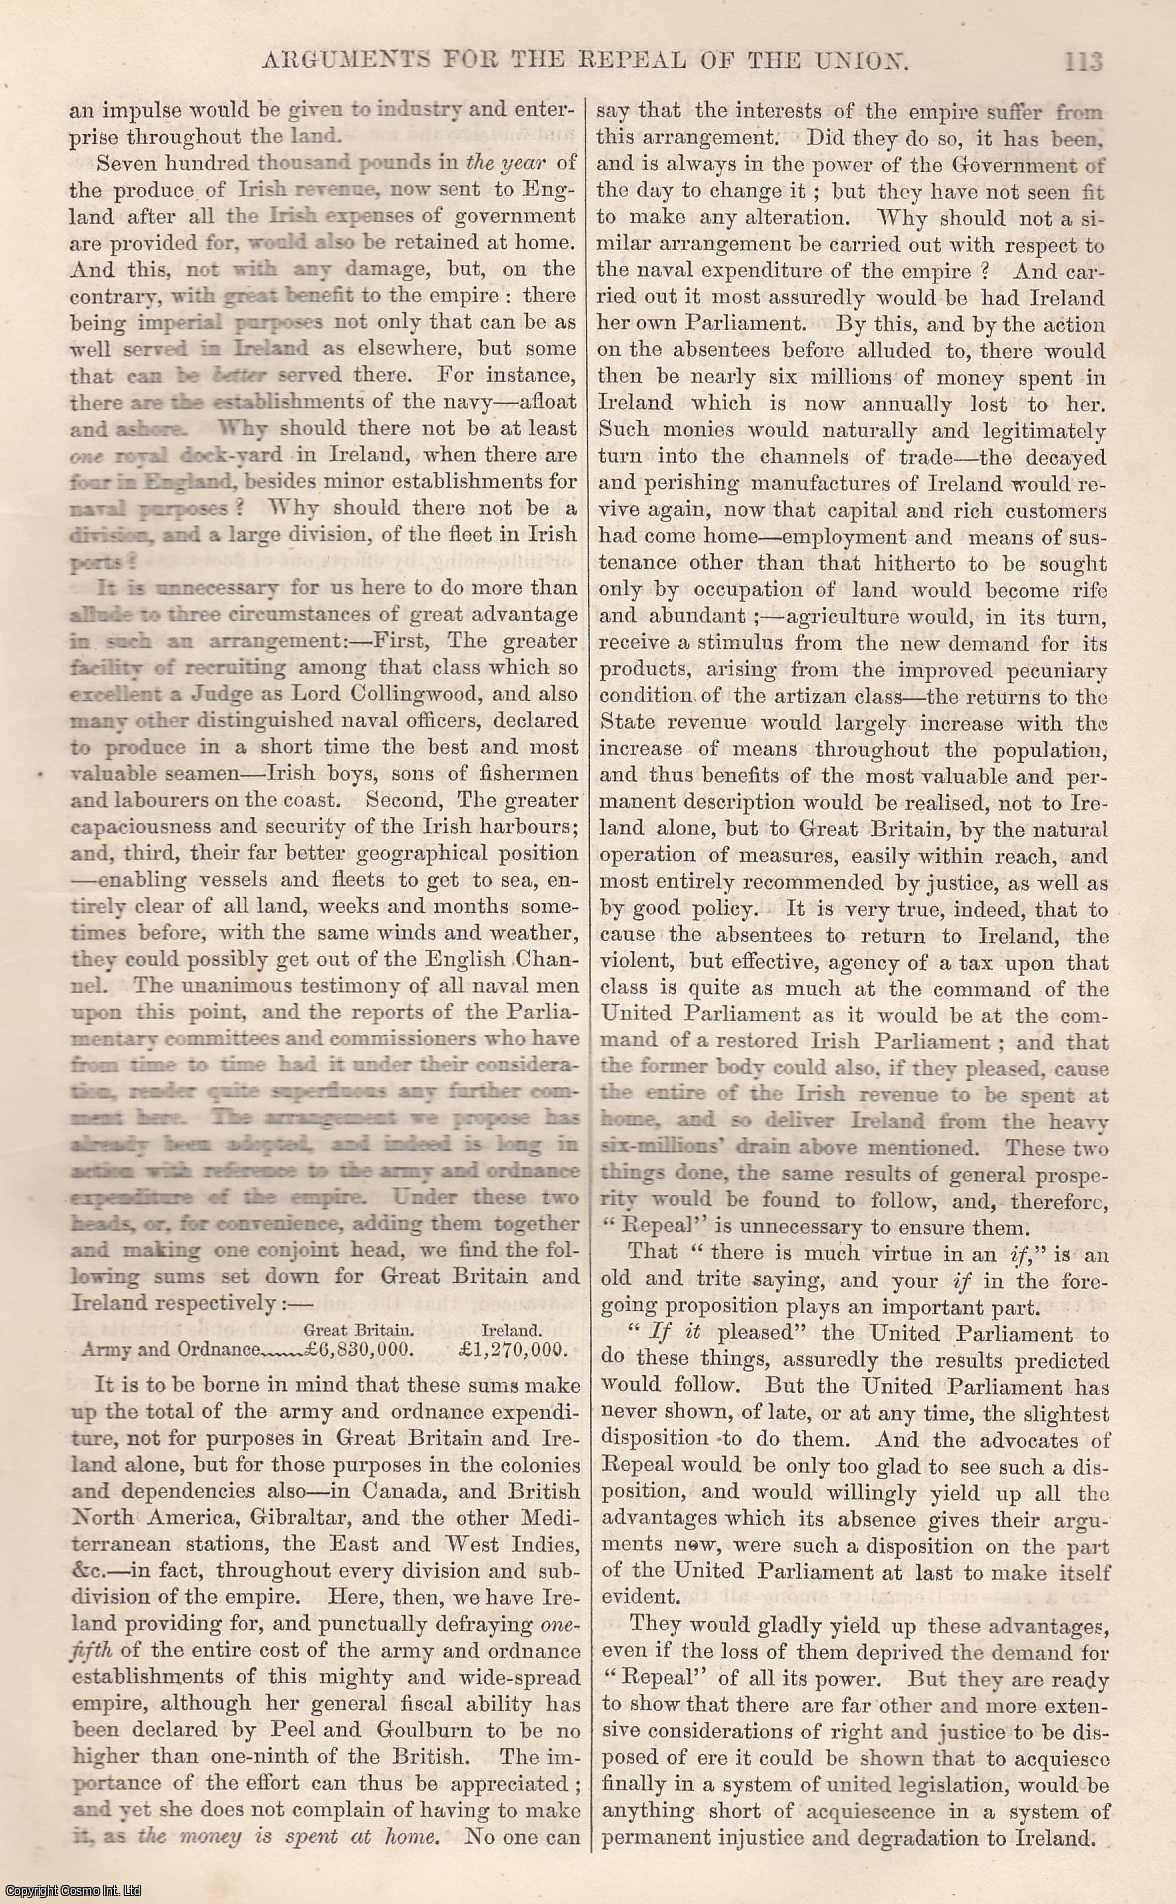 John O'Connell, M.P. - Arguments for The Repeal of The Union. An original article from Tait's Edinburgh Magazine, 1847.